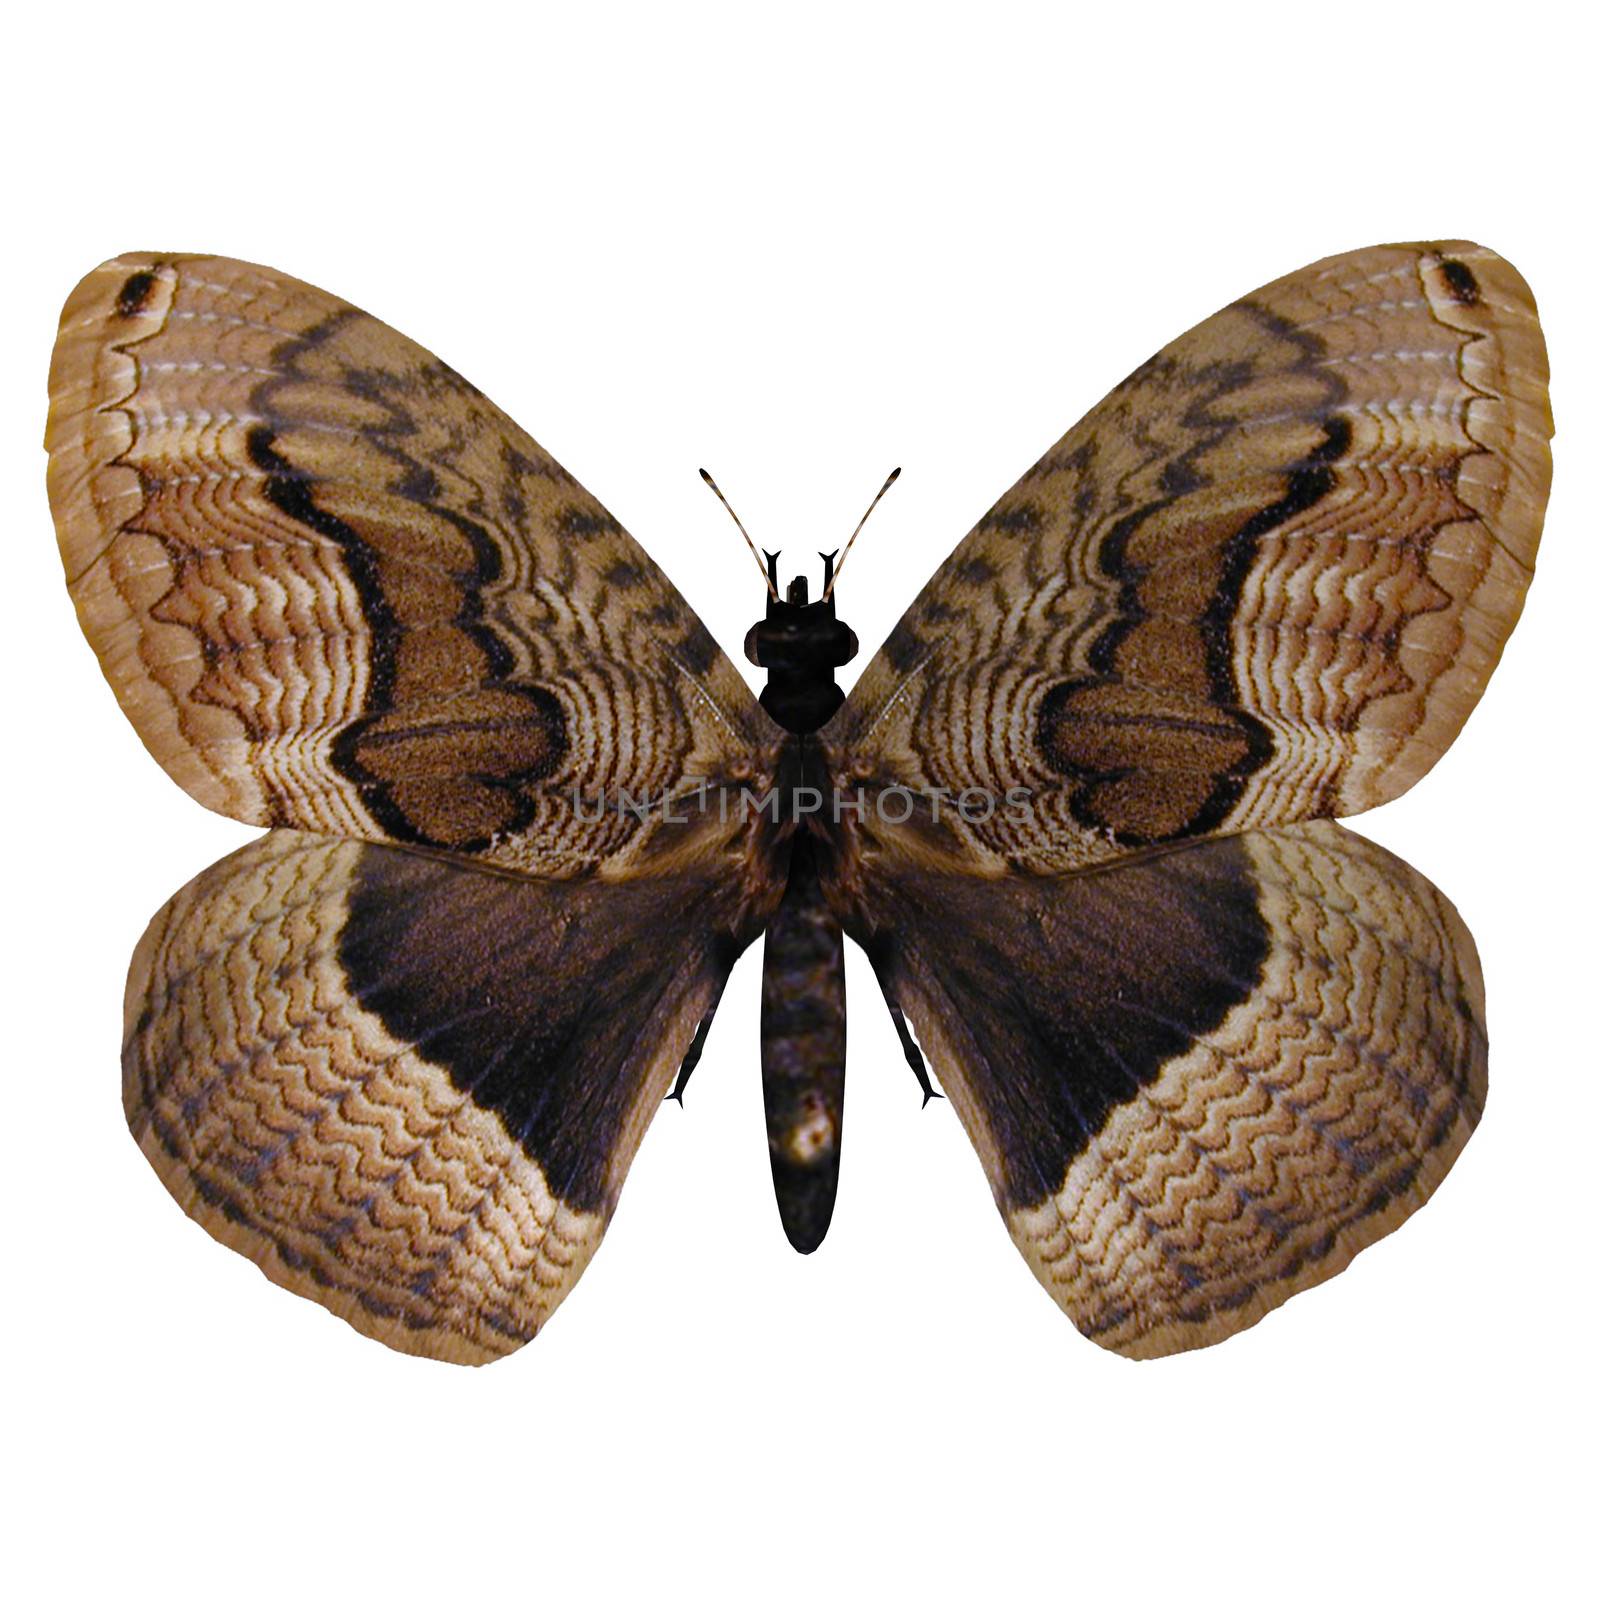 3D digital render of a hartigs brahmea butterfly isolated on white background